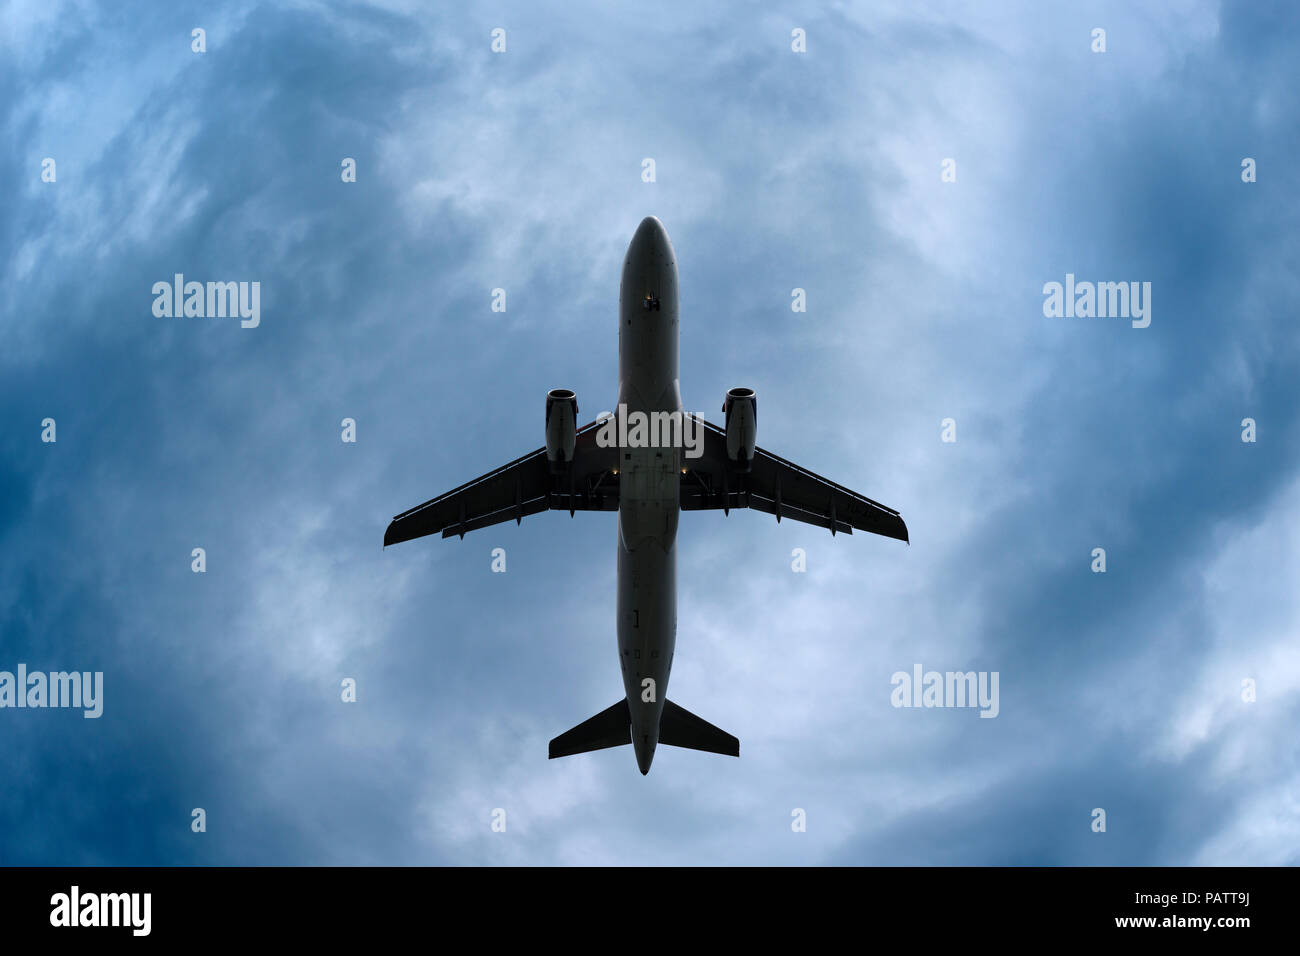 Airplane in a Dramatic Stormy Sky, Low Angle, United Kingdom Stock Photo